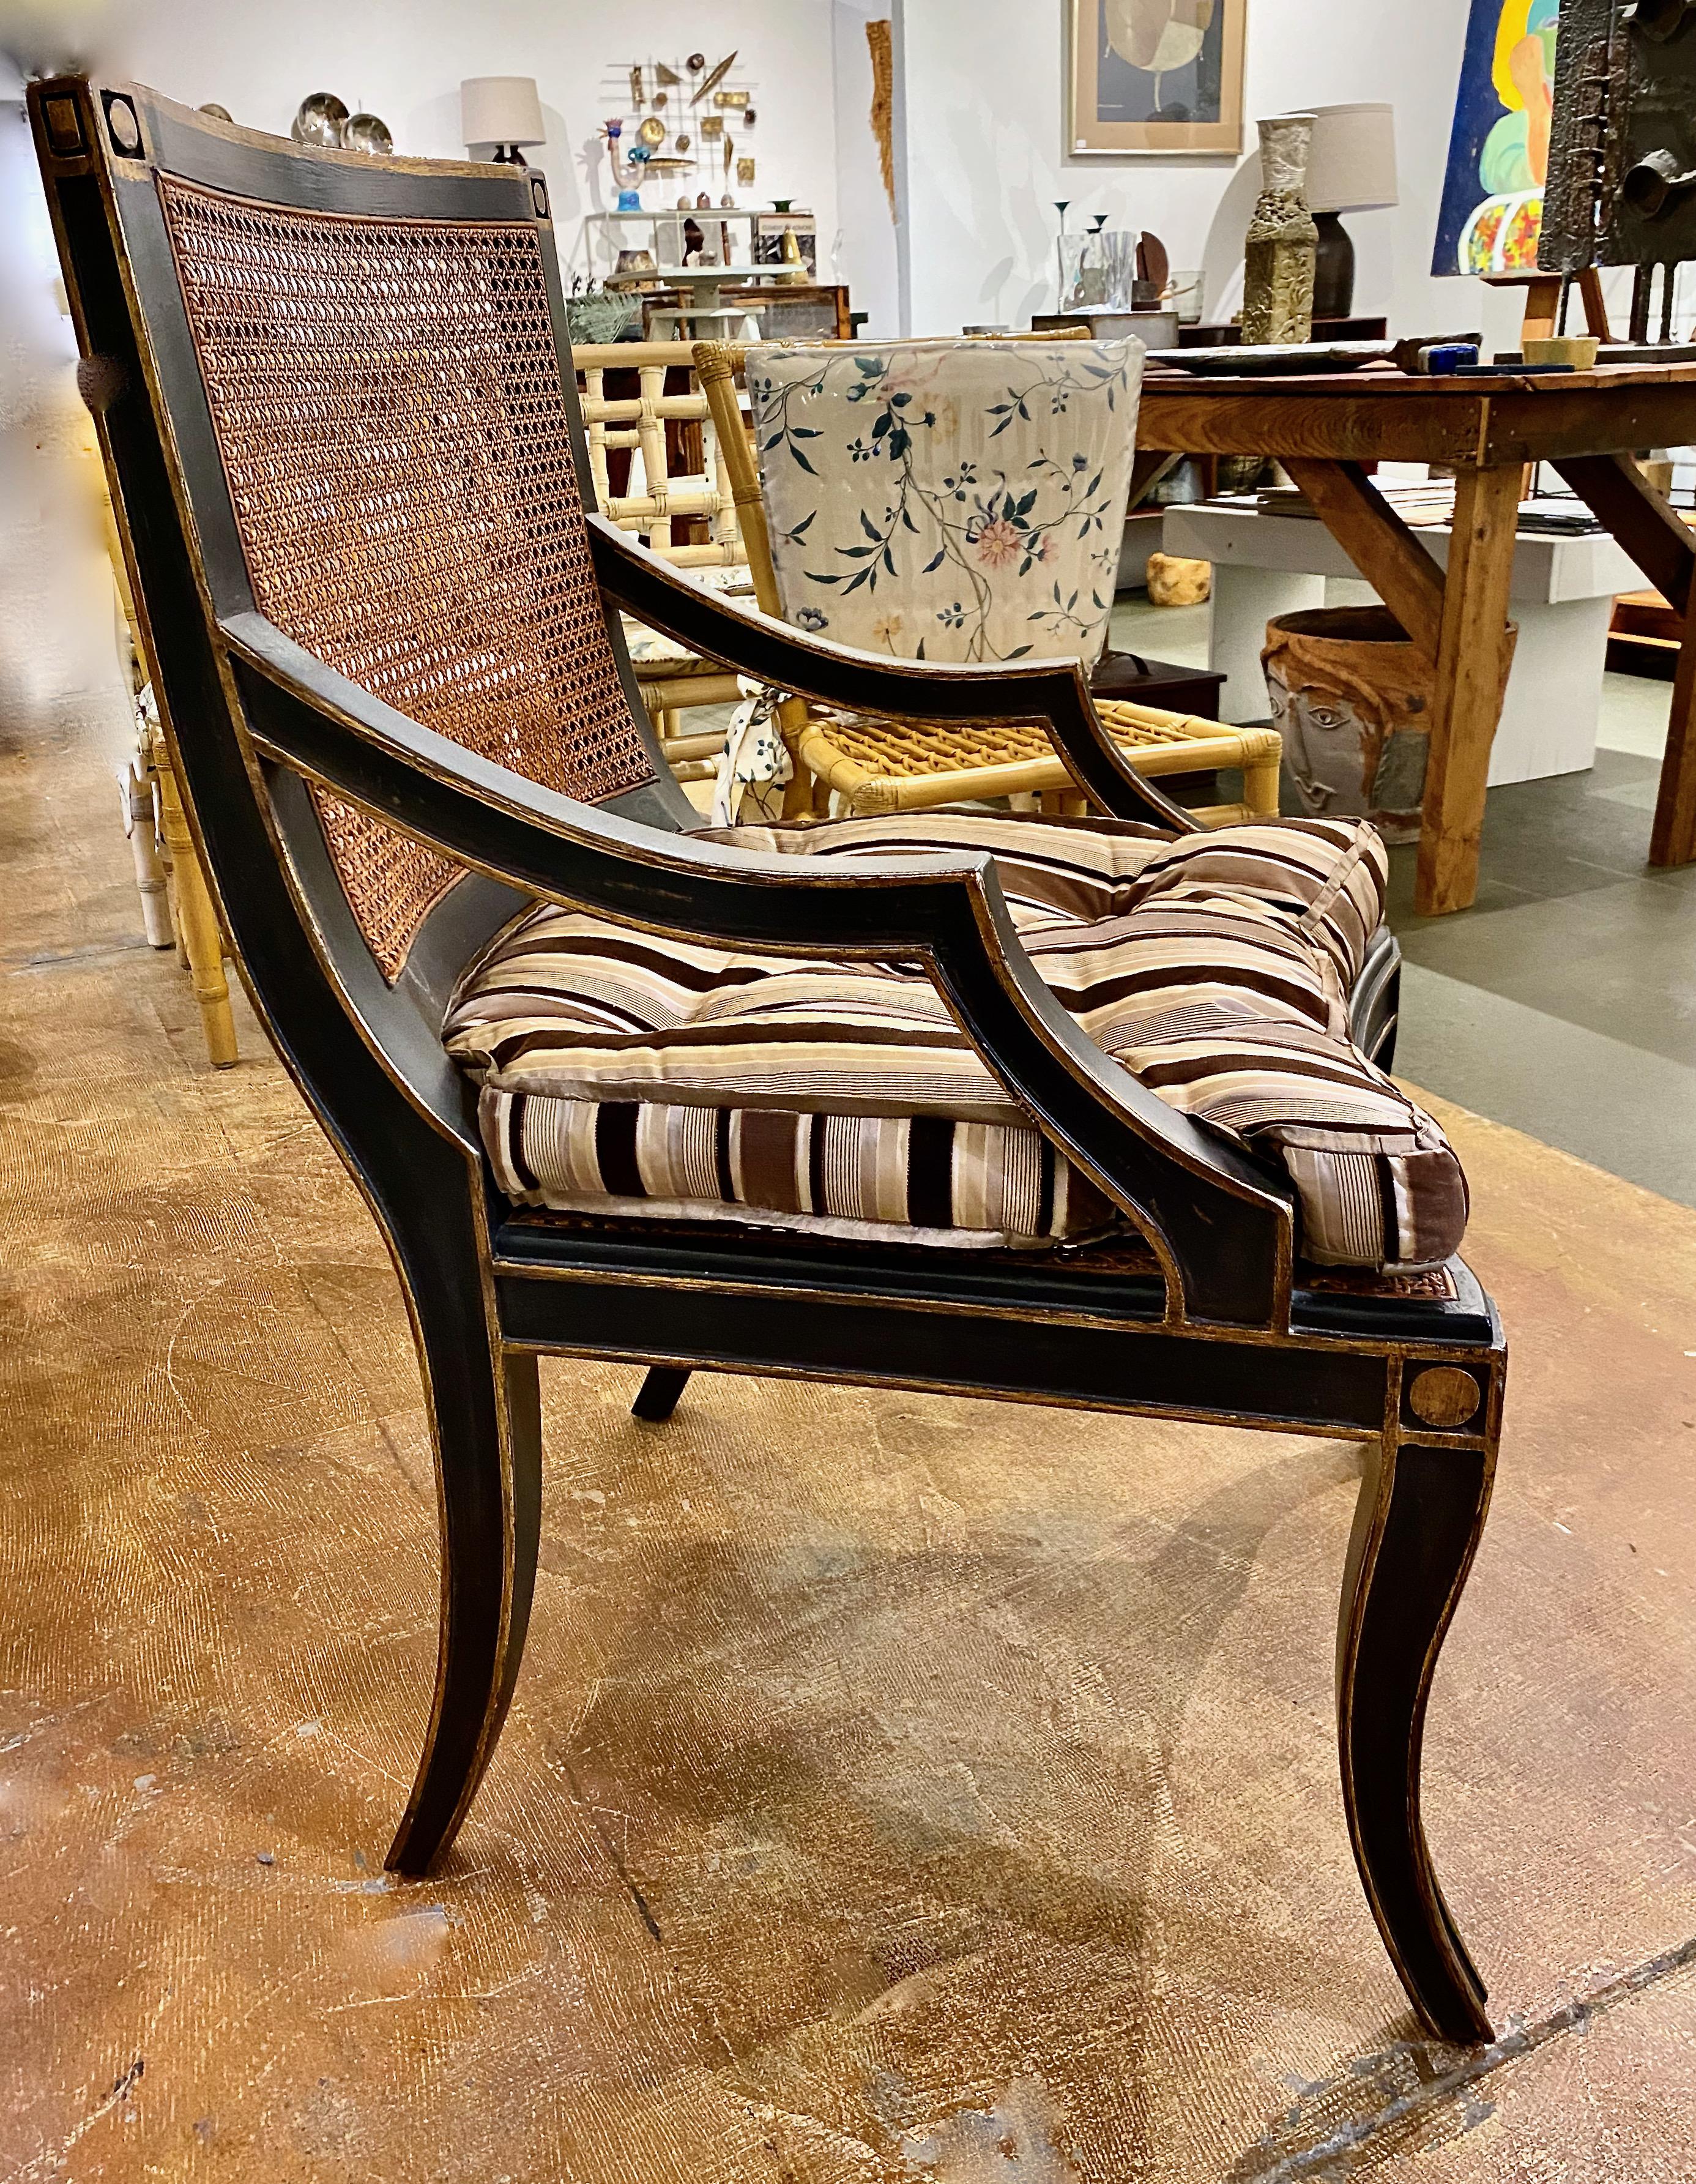 This is an outstanding pair of early 21st century open arm chairs in the Hollywood Regency style. The chairs feature ebonized carved frames with caned seats and backs. The chairs are detailed in gold leaf over the ebonized frames. Both chairs are in